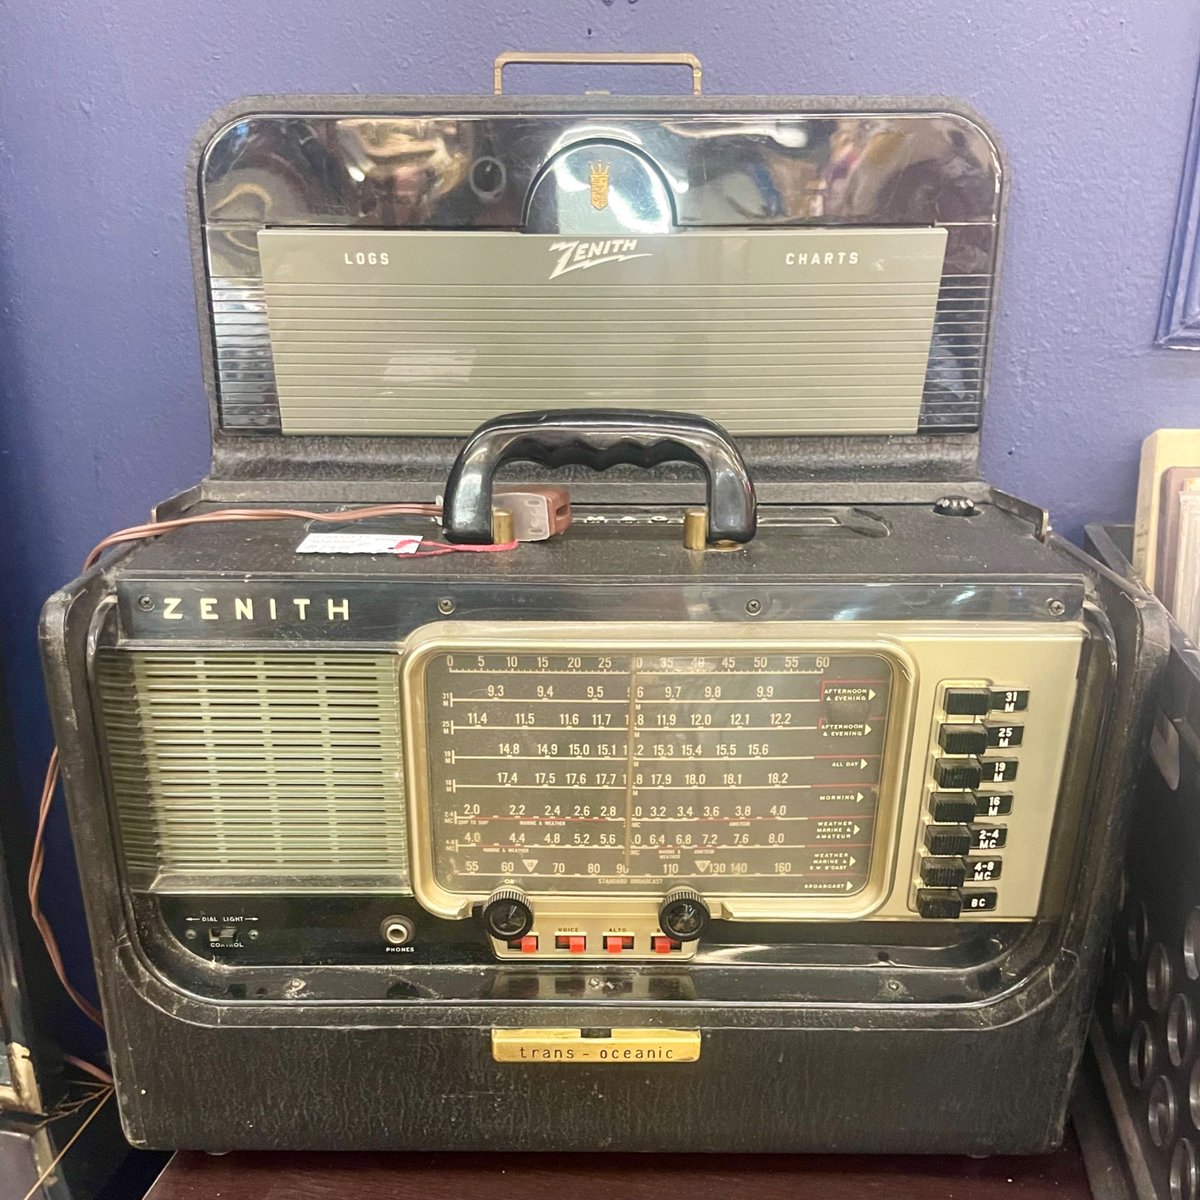 This amazing Zenith Wave Magnet Trans-Oceanic Radio from booth 811 still works! 😱
Please call for purchase & availability
.
.
.
#AntiqueTrove #ScottsdaleAntiqueTrove #retro #vintage #antique #MidCenturyModern #AntiqueStore #MCM #VintageRadio